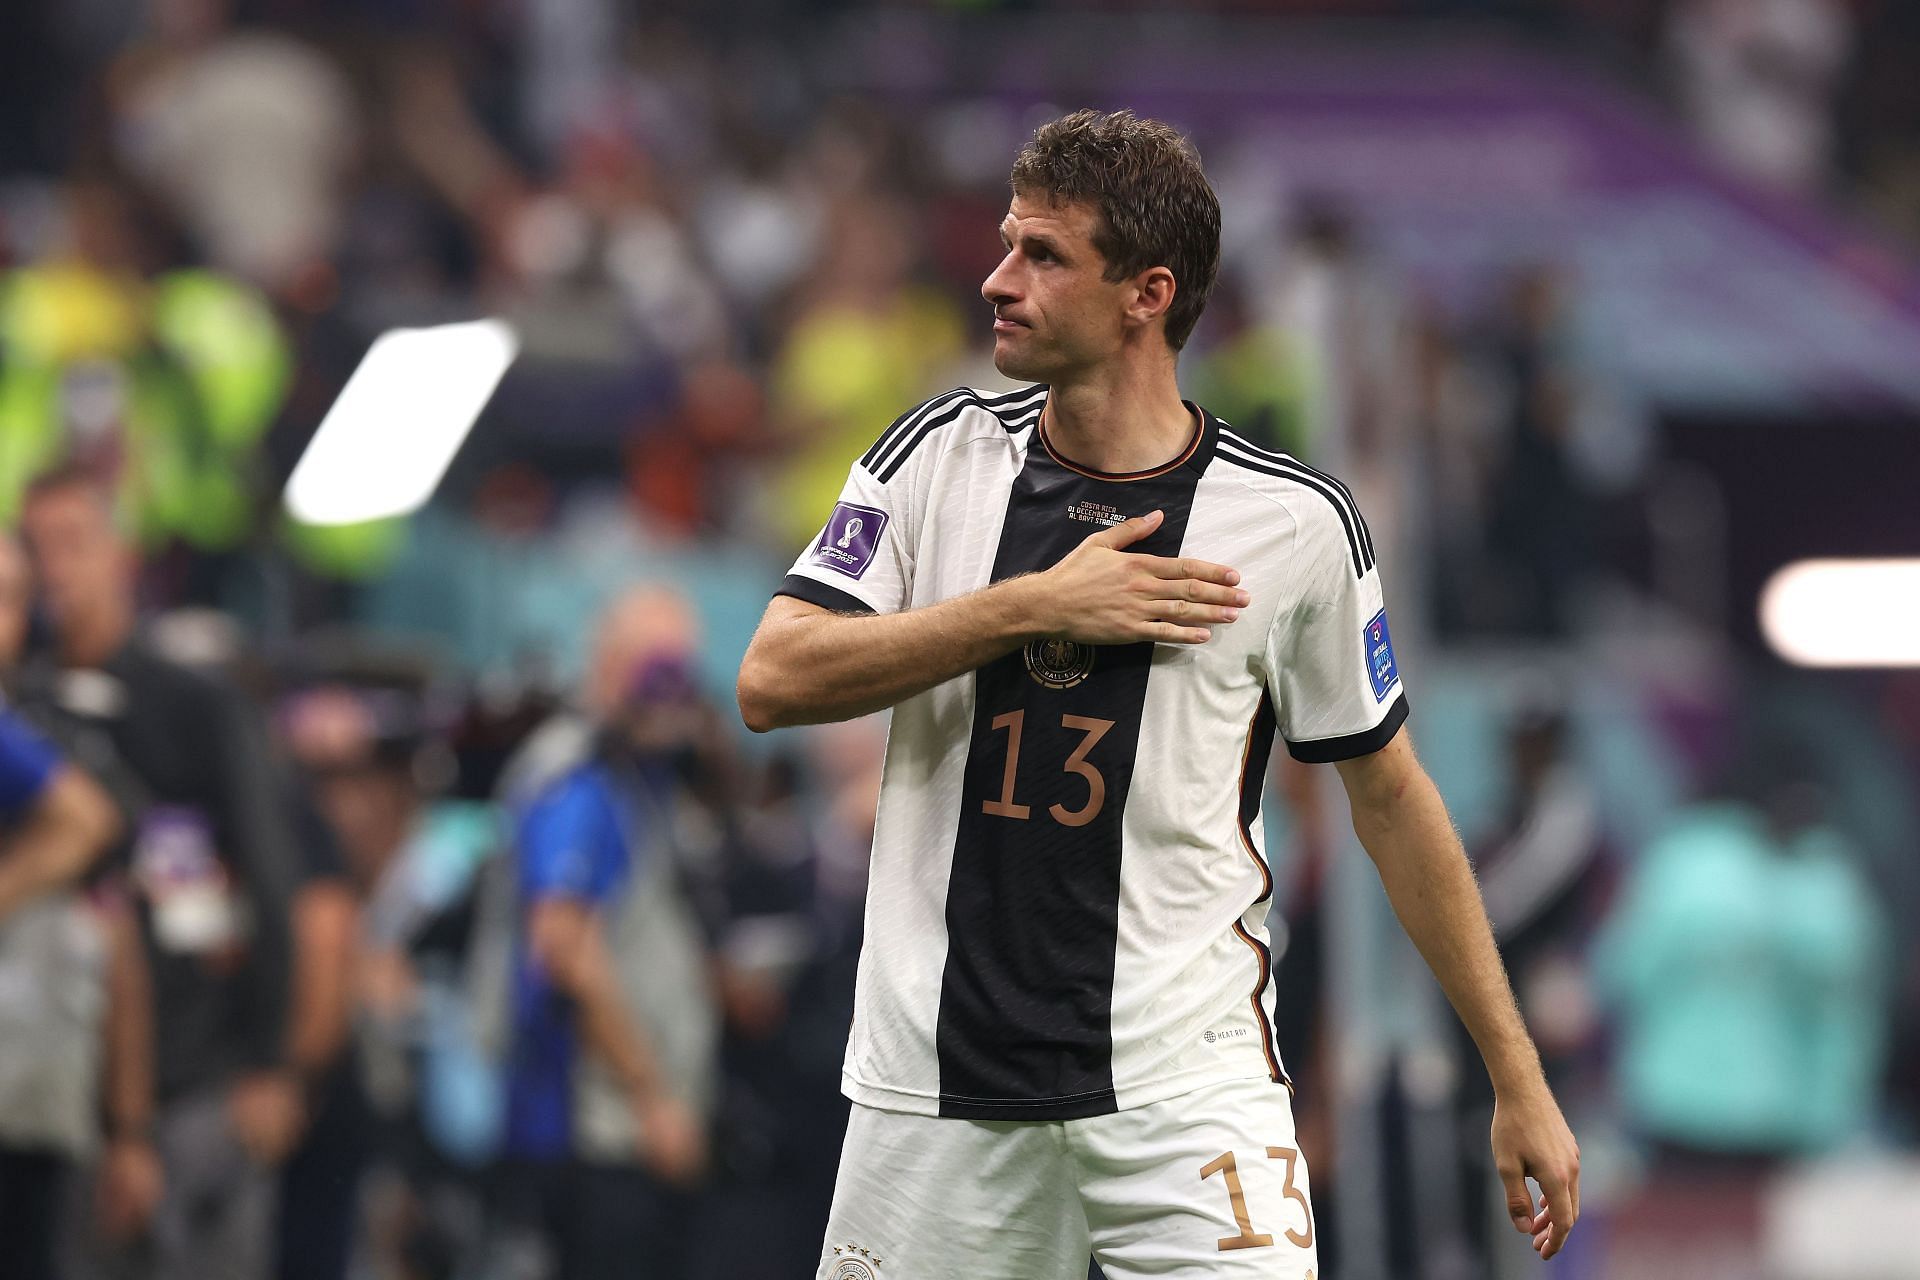 Thomas Muller has struggled over the past two FIFA World Cups for Germany